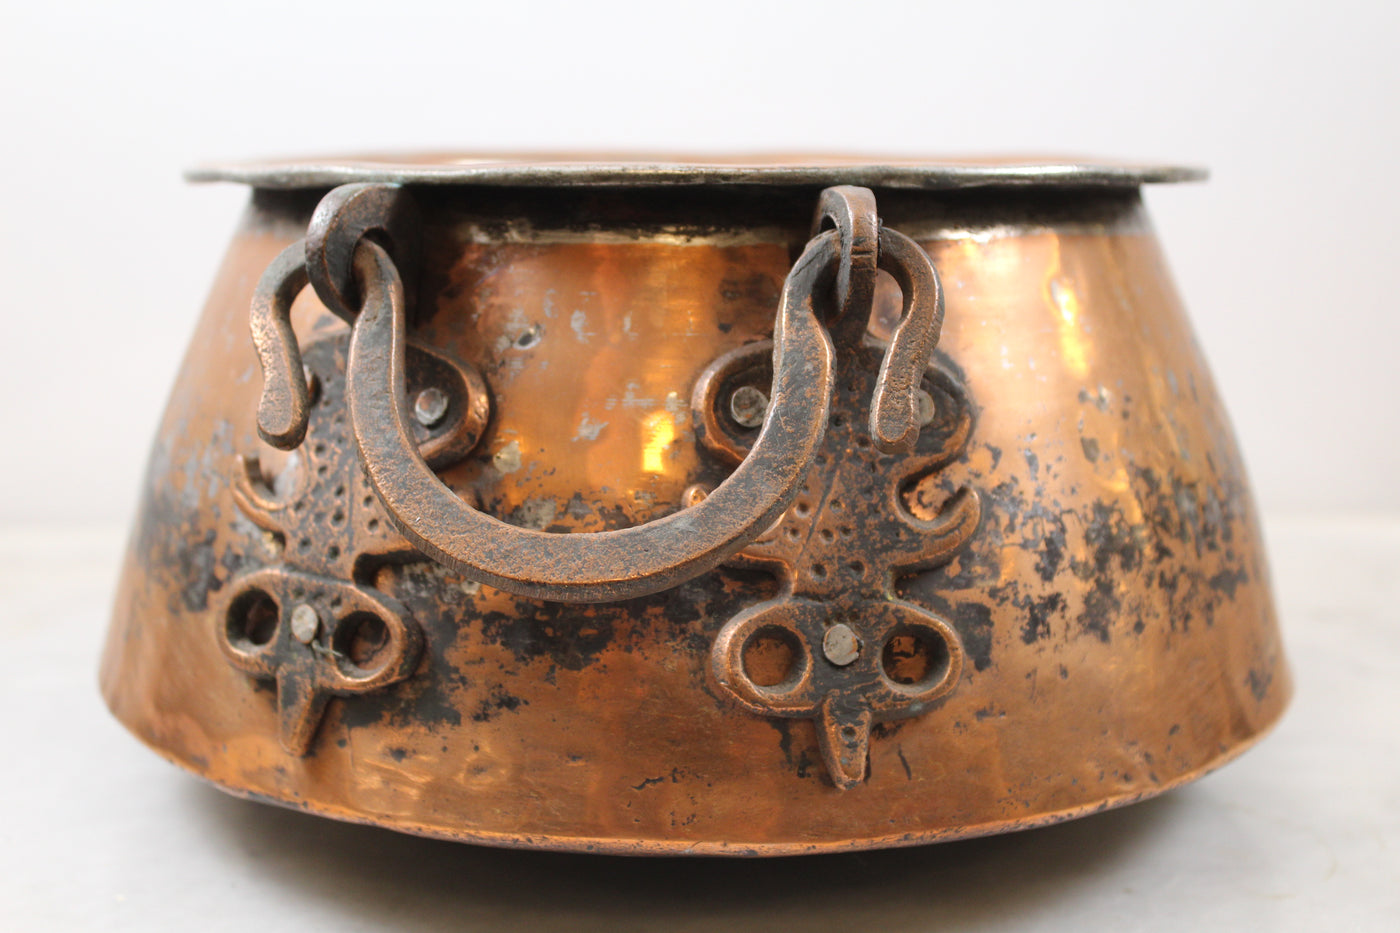 Antique Large Hand Hammered Copper Cauldron with Bronze Handles